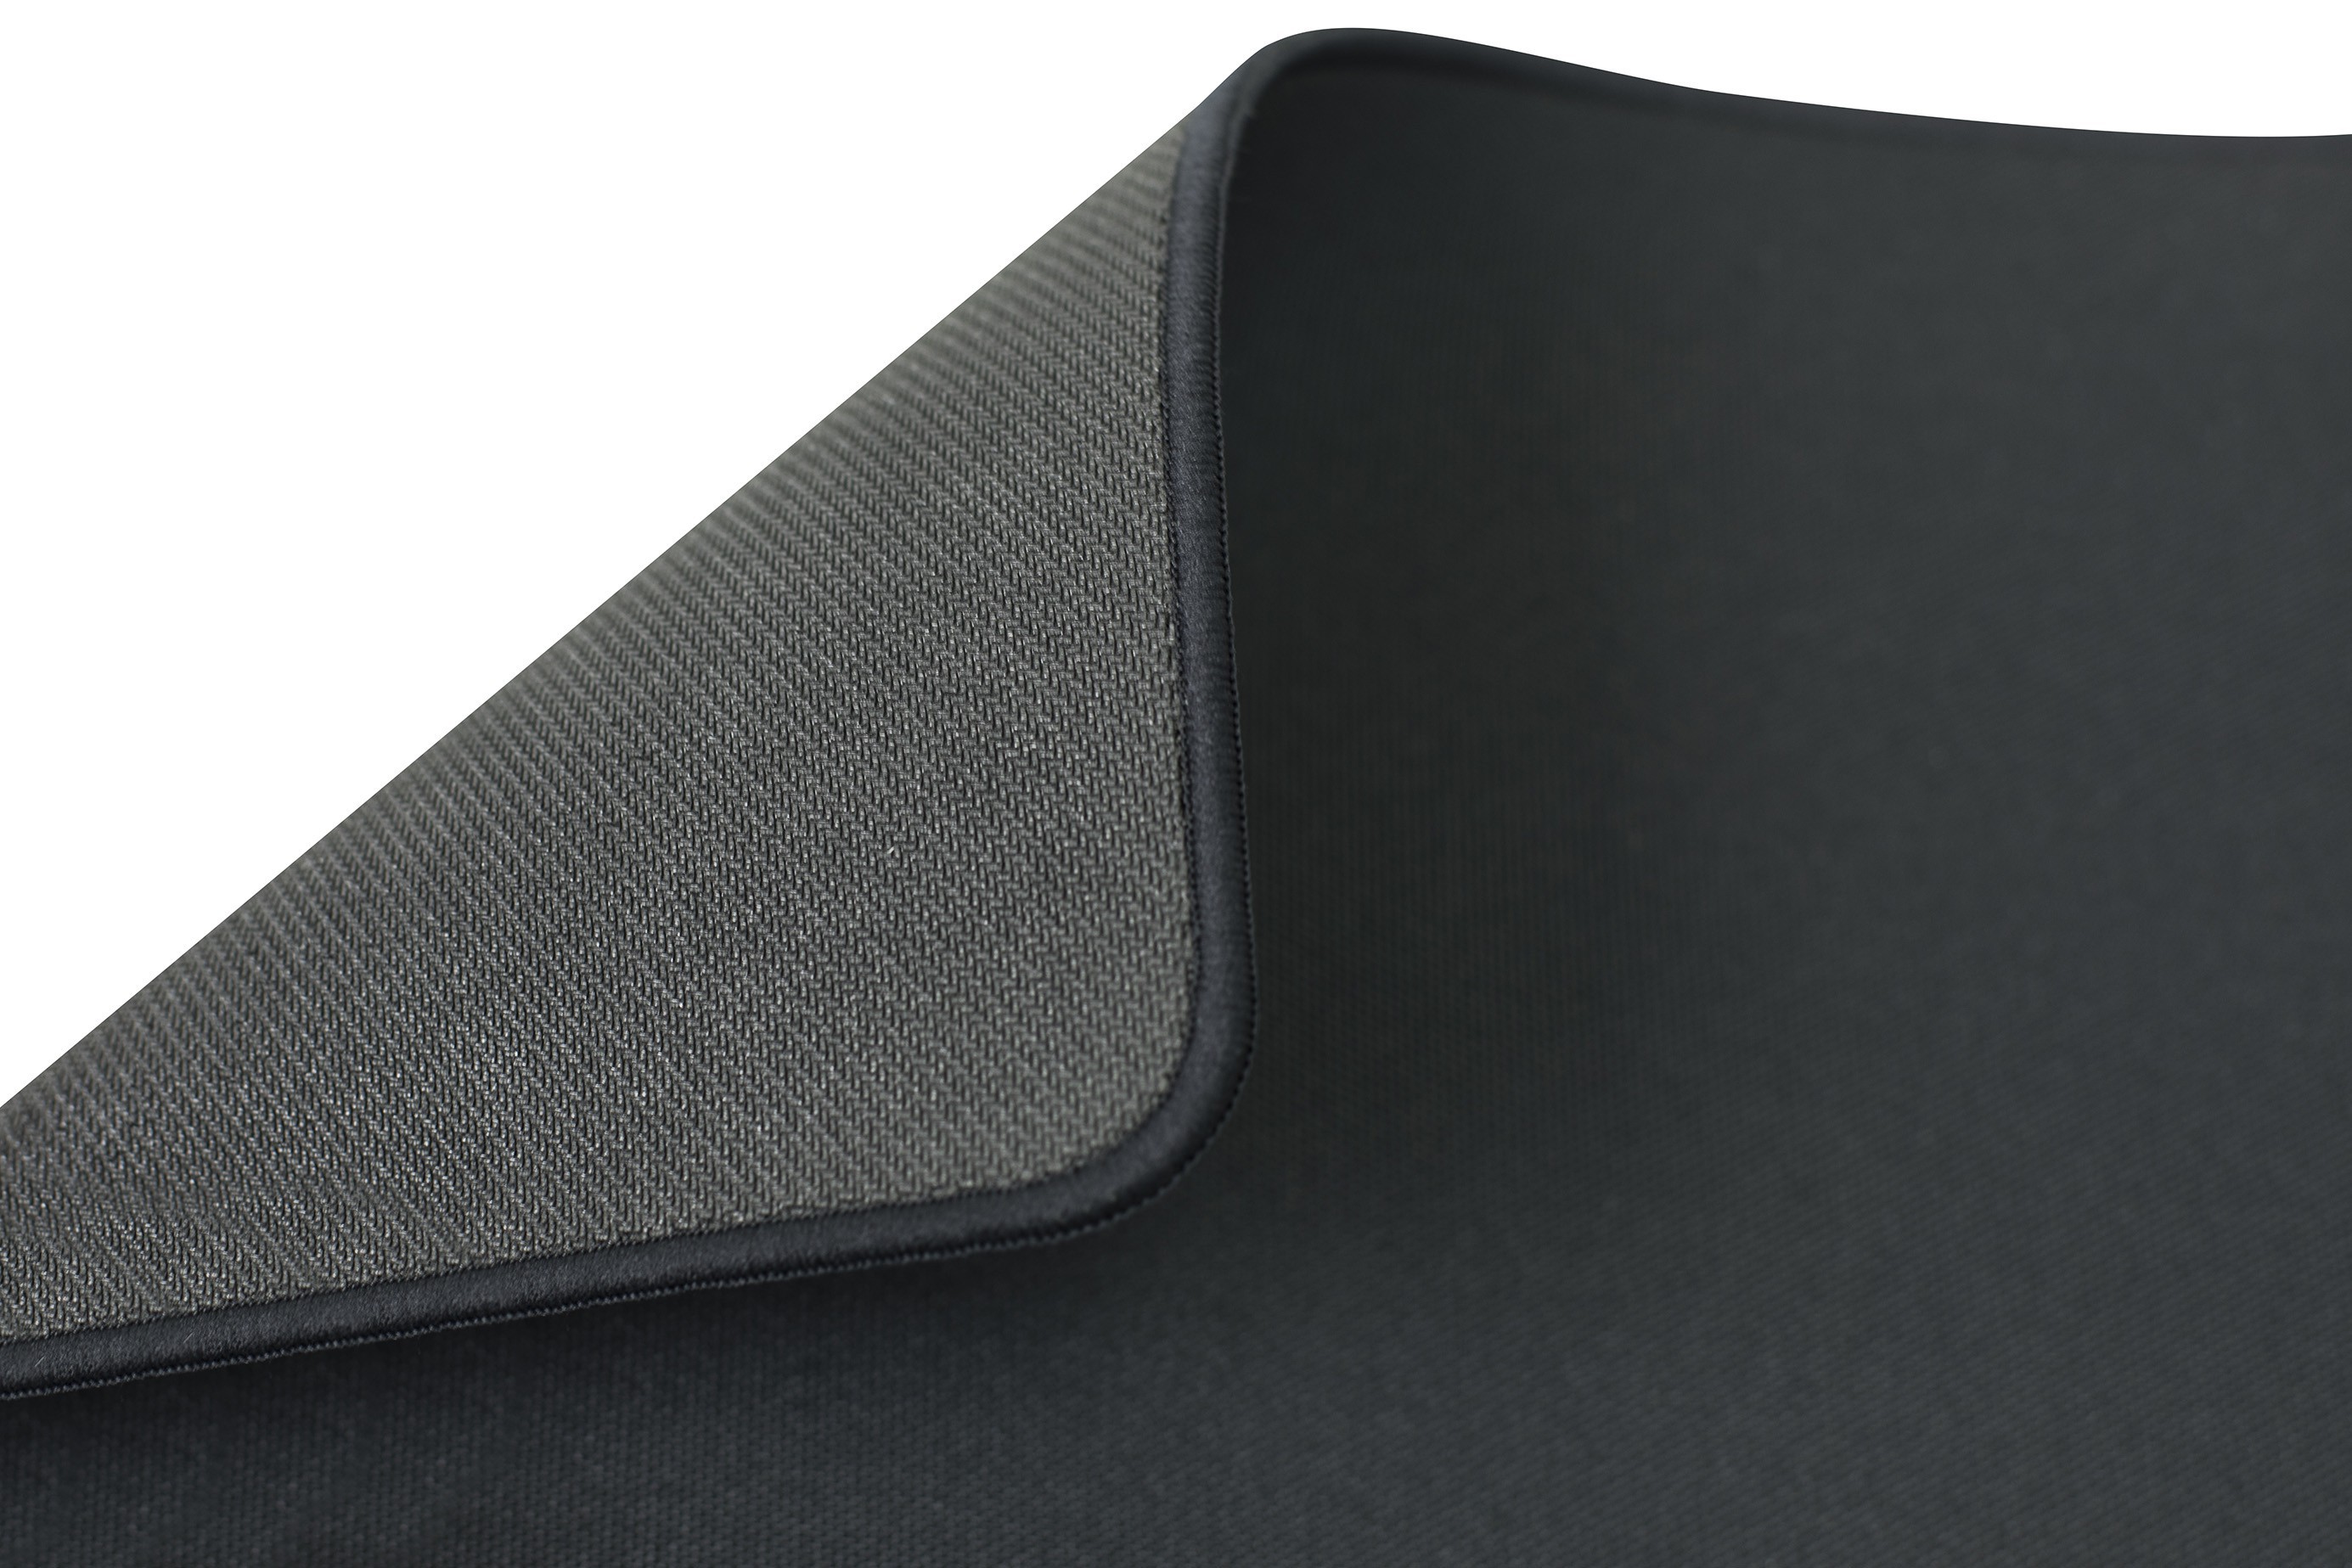 COOLER MASTER MASTERACCESSORY MP510 L BLACK 450X350MM MOUSE PAD